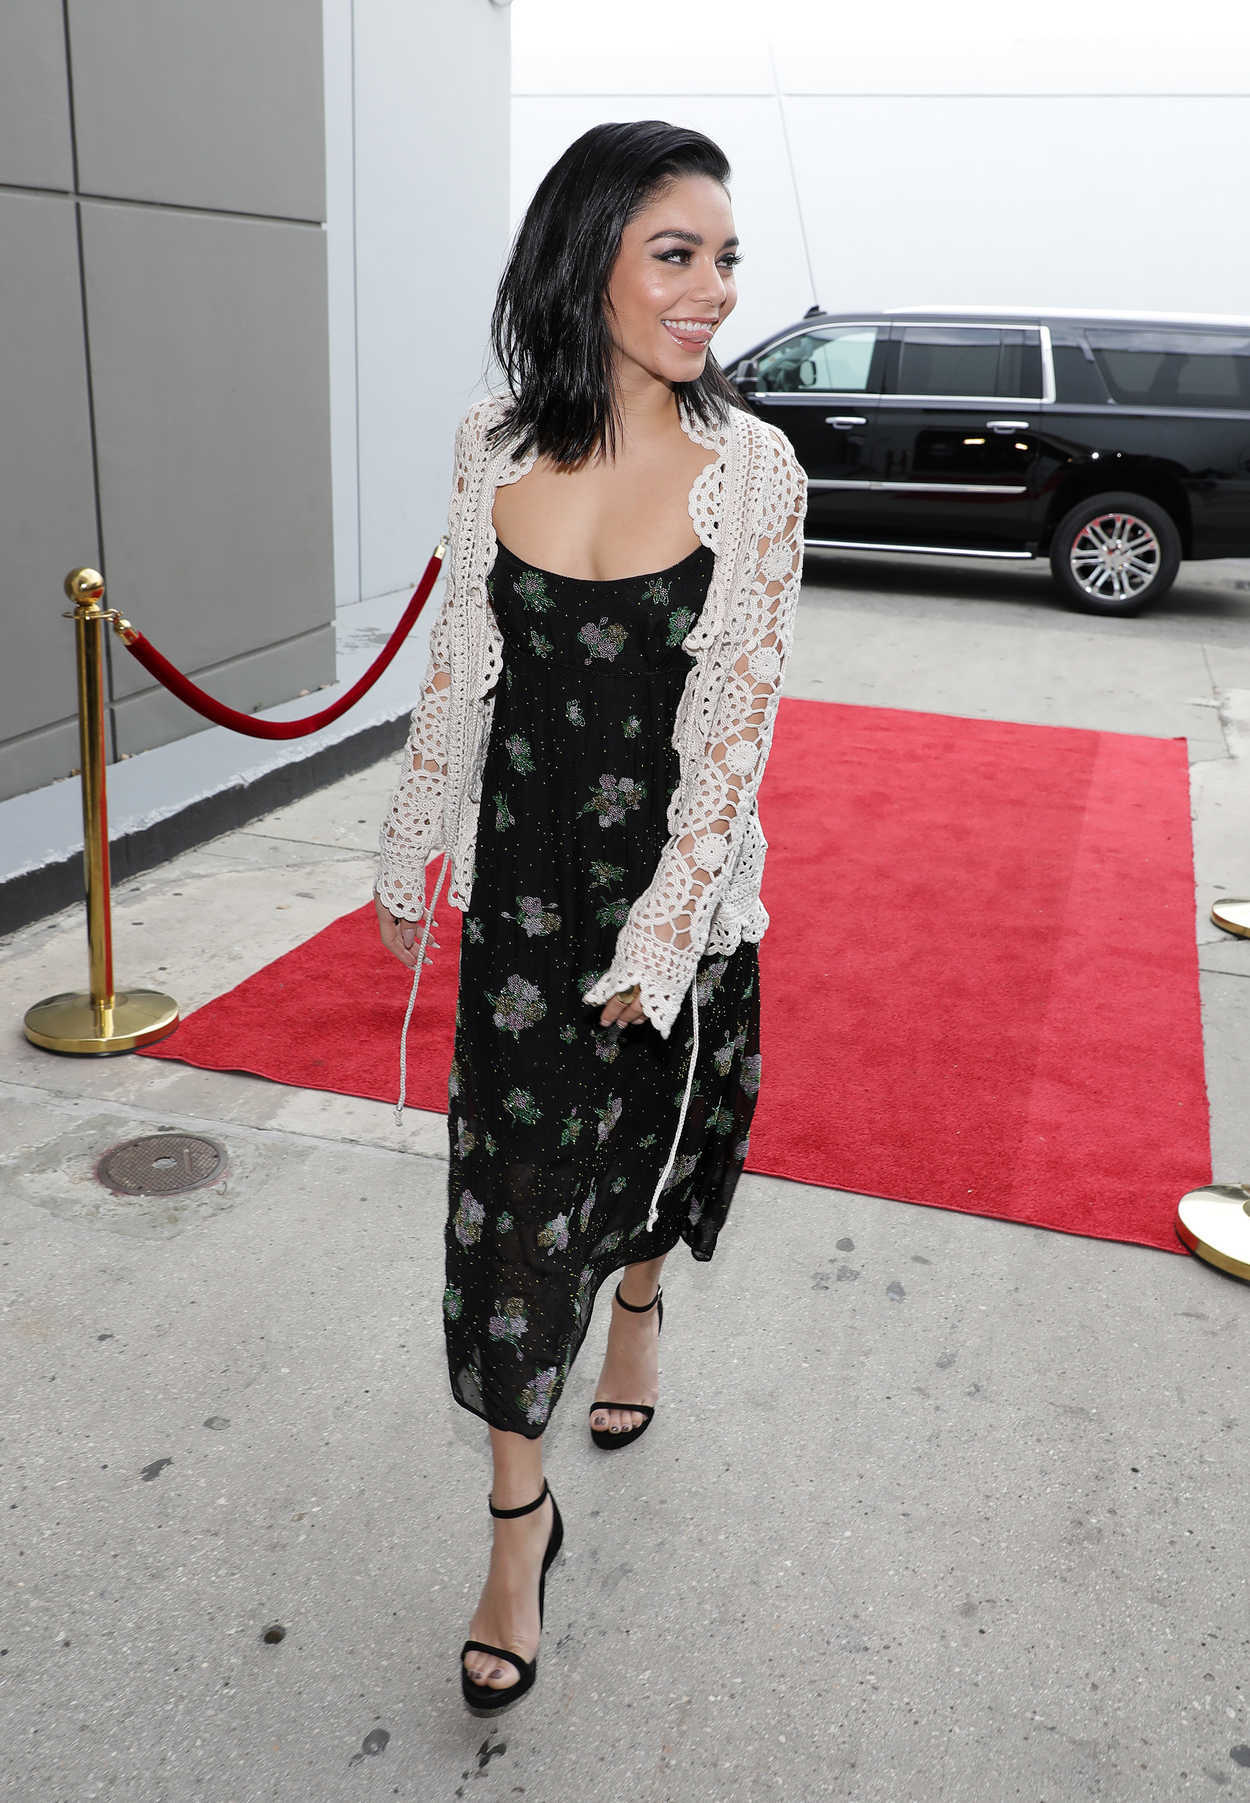 Vanessa Hudgens in a Black Floral Dress Promotes Her New Movie in Miami ...